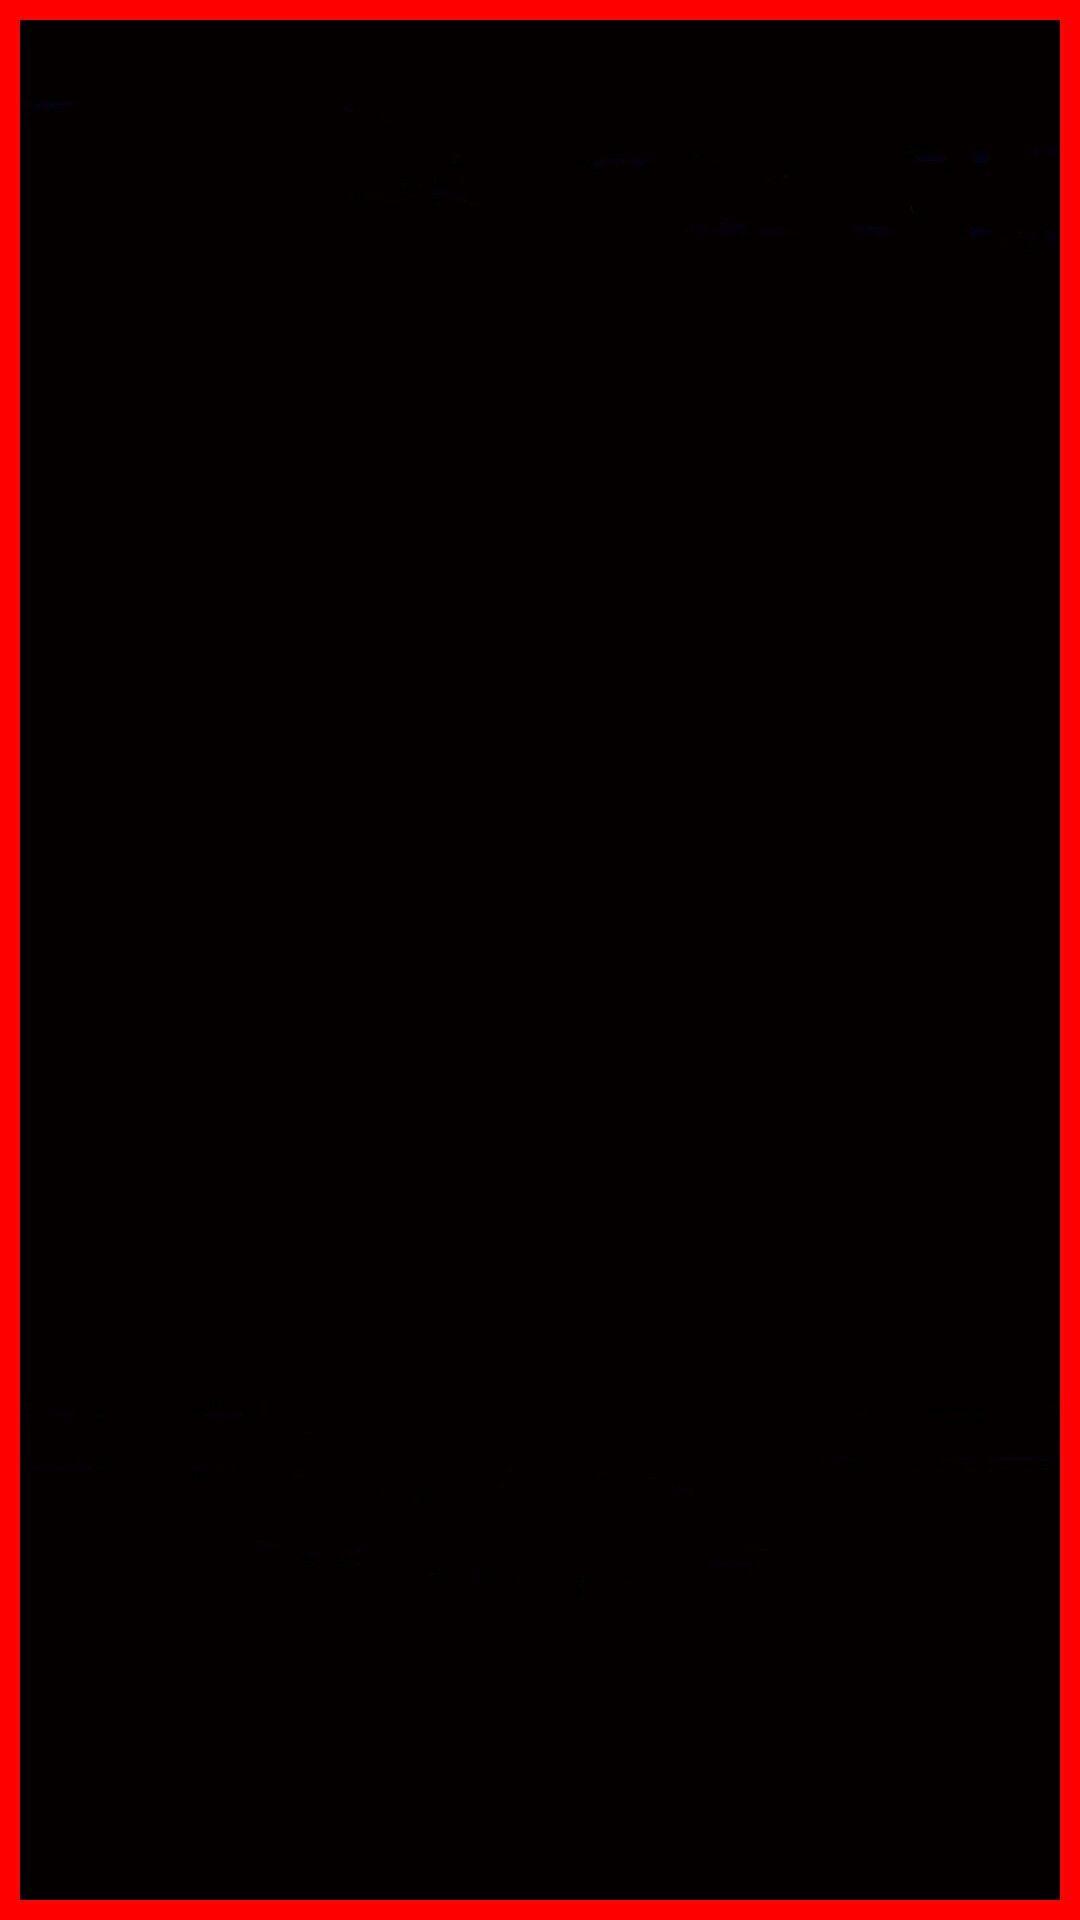 iPhone X Red Border Wallpaper